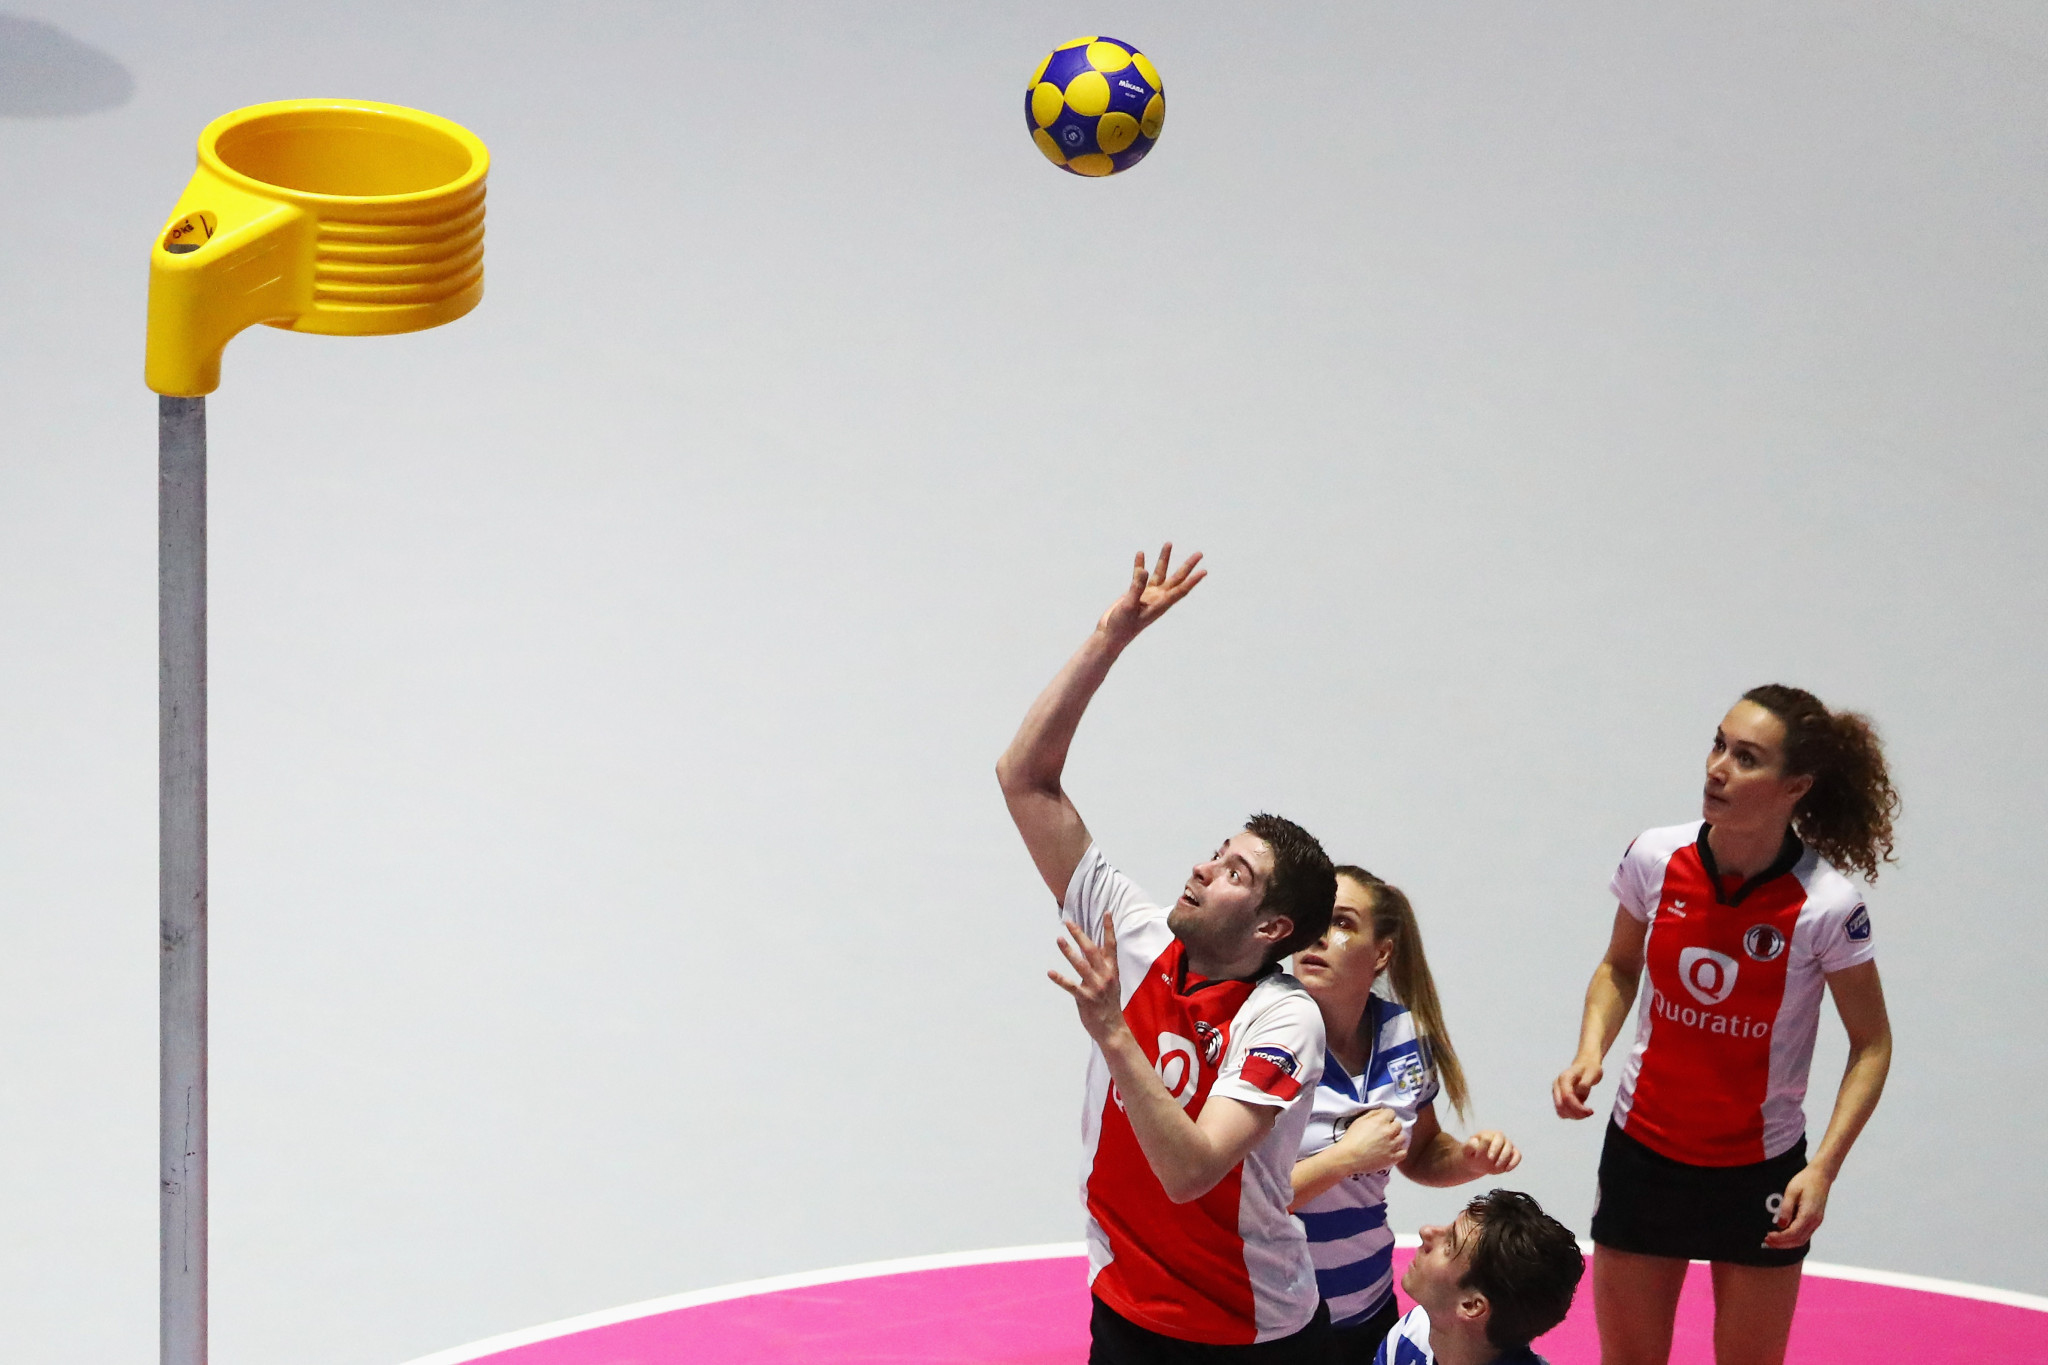 International Korfball Federation revives Olympic Format Taskforce, and aims for final report in 2023